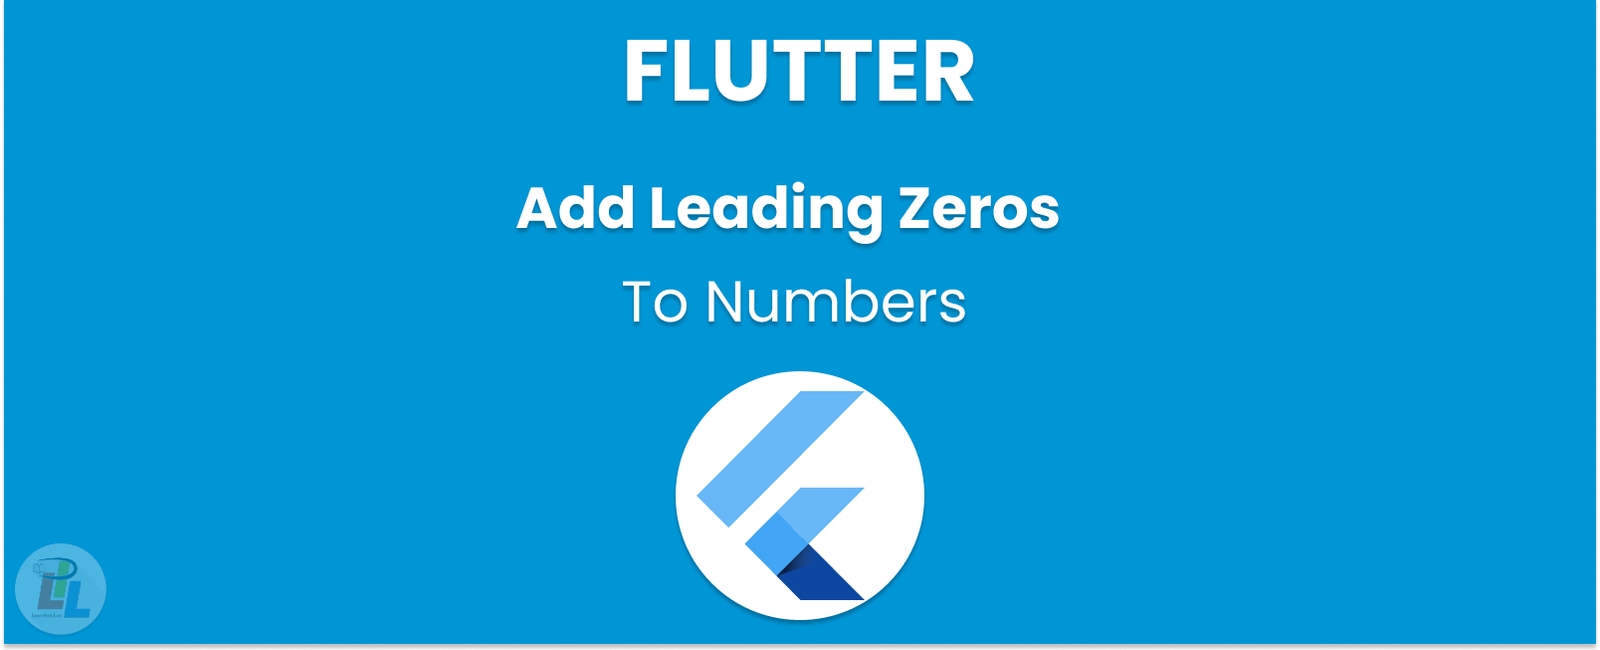 The Quickest Way To Add Leading Zeros To Numbers In Flutter